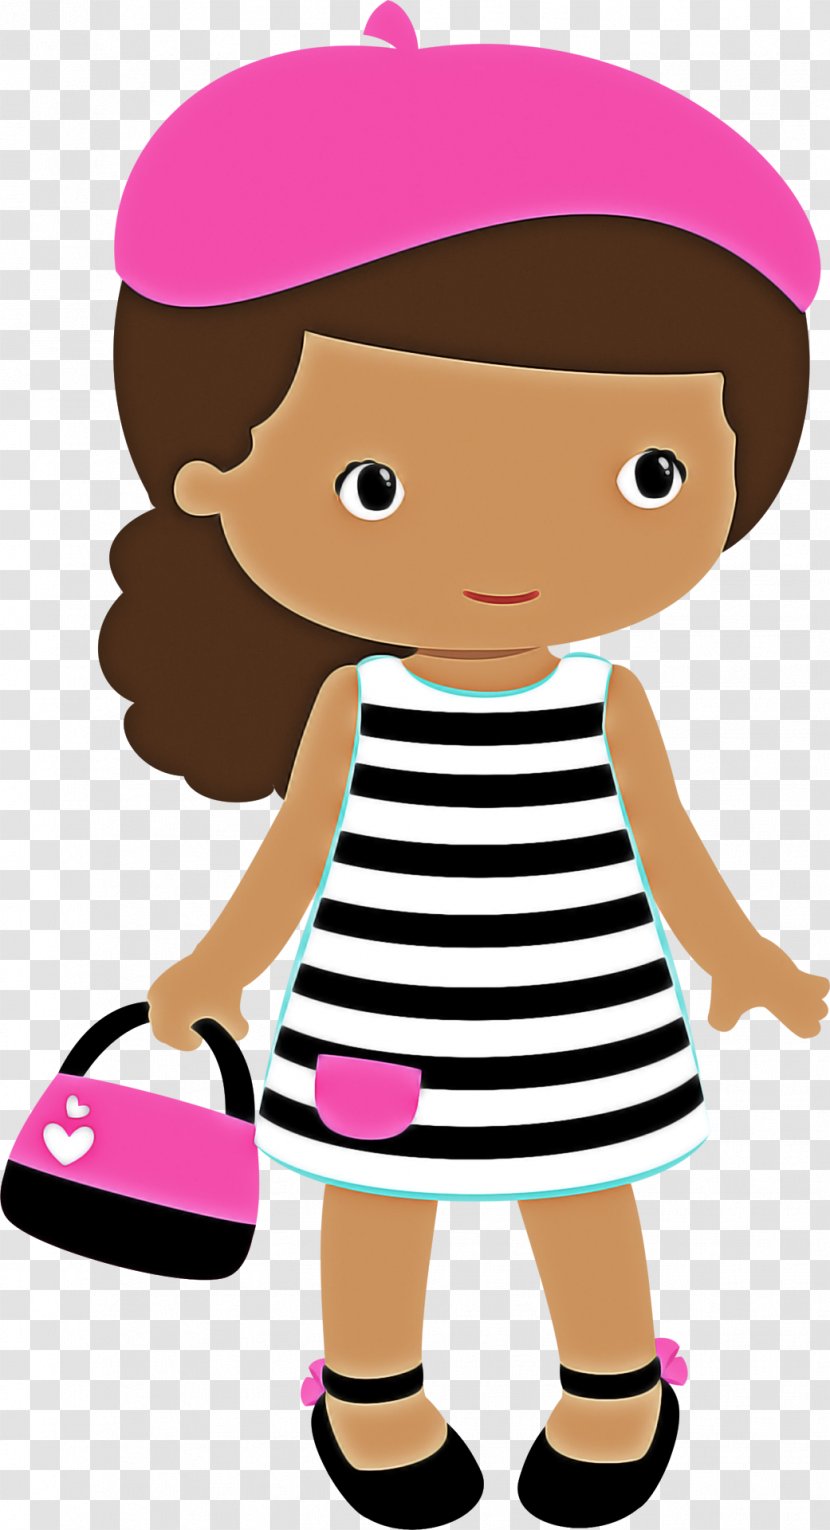 Cartoon Clip Art Pink Doll Child - Toy - Style Transparent PNG